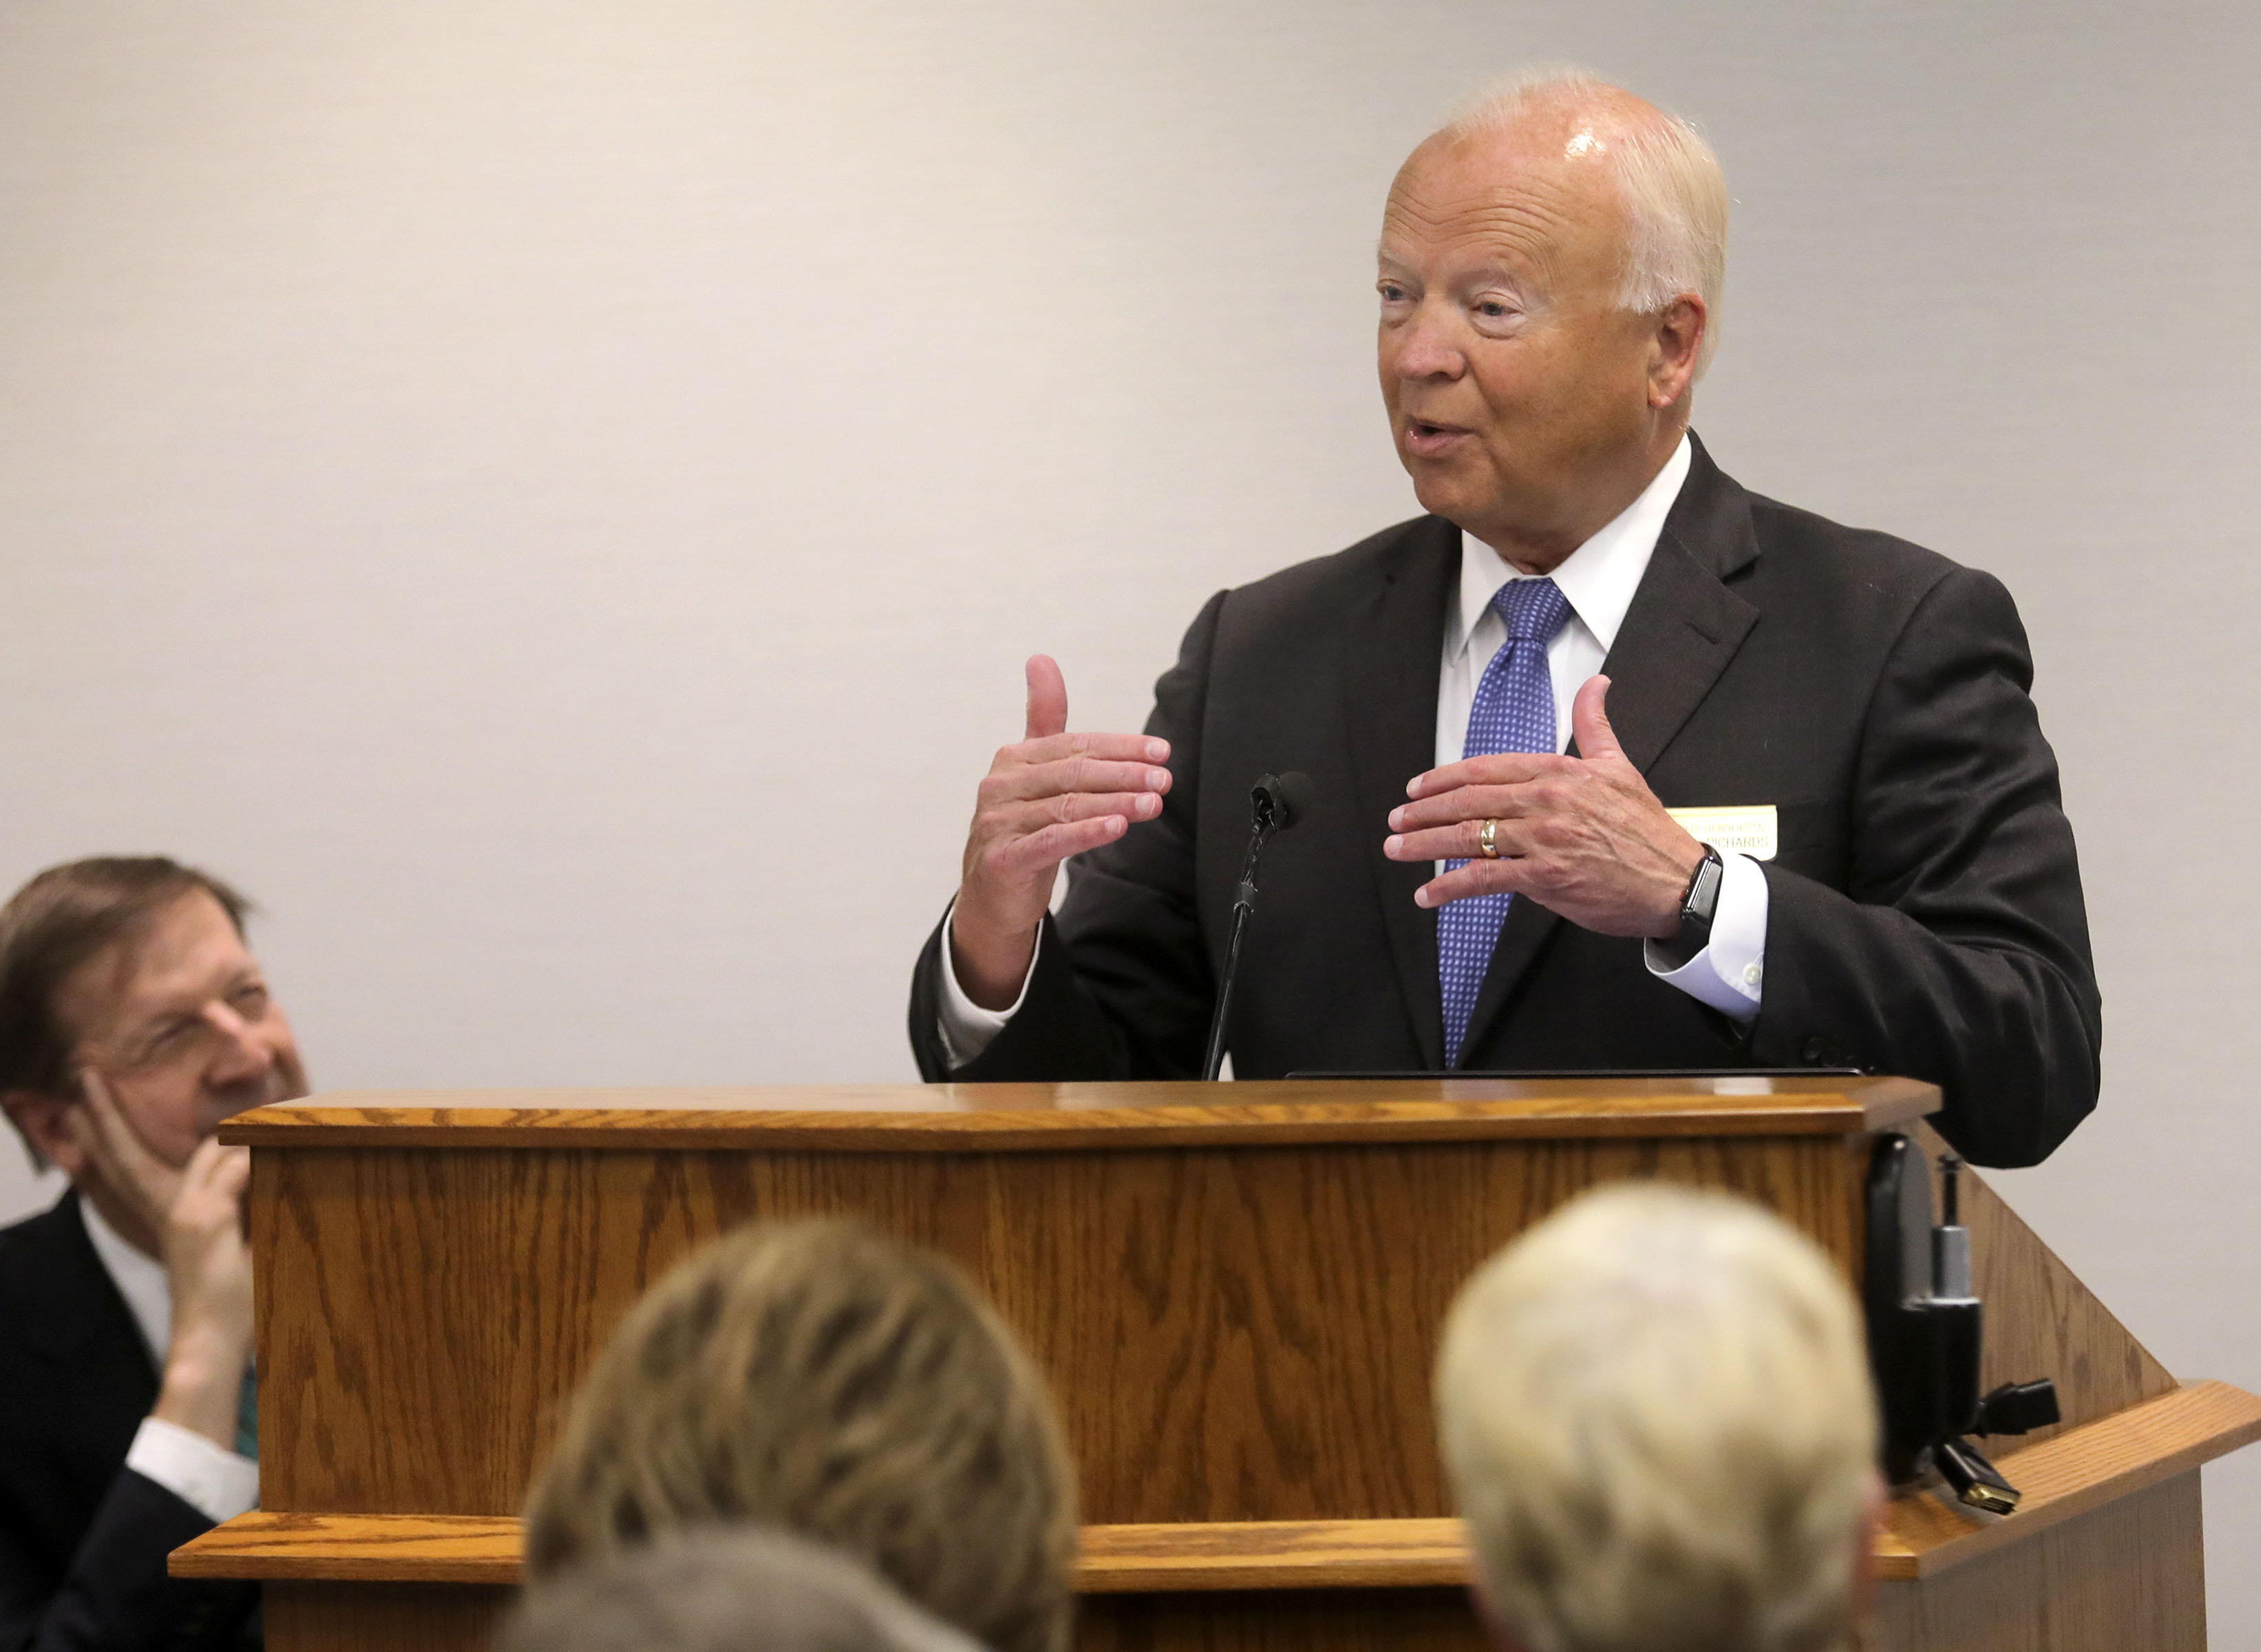 Elder Kent F. Richards, emeritus General Authority Seventy of The Church of Jesus Christ of Latter-day Saints, speaks during the FamilySearch 125th anniversary celebration at the Family History Library in Salt Lake City on Wednesday, Nov. 13, 2019.